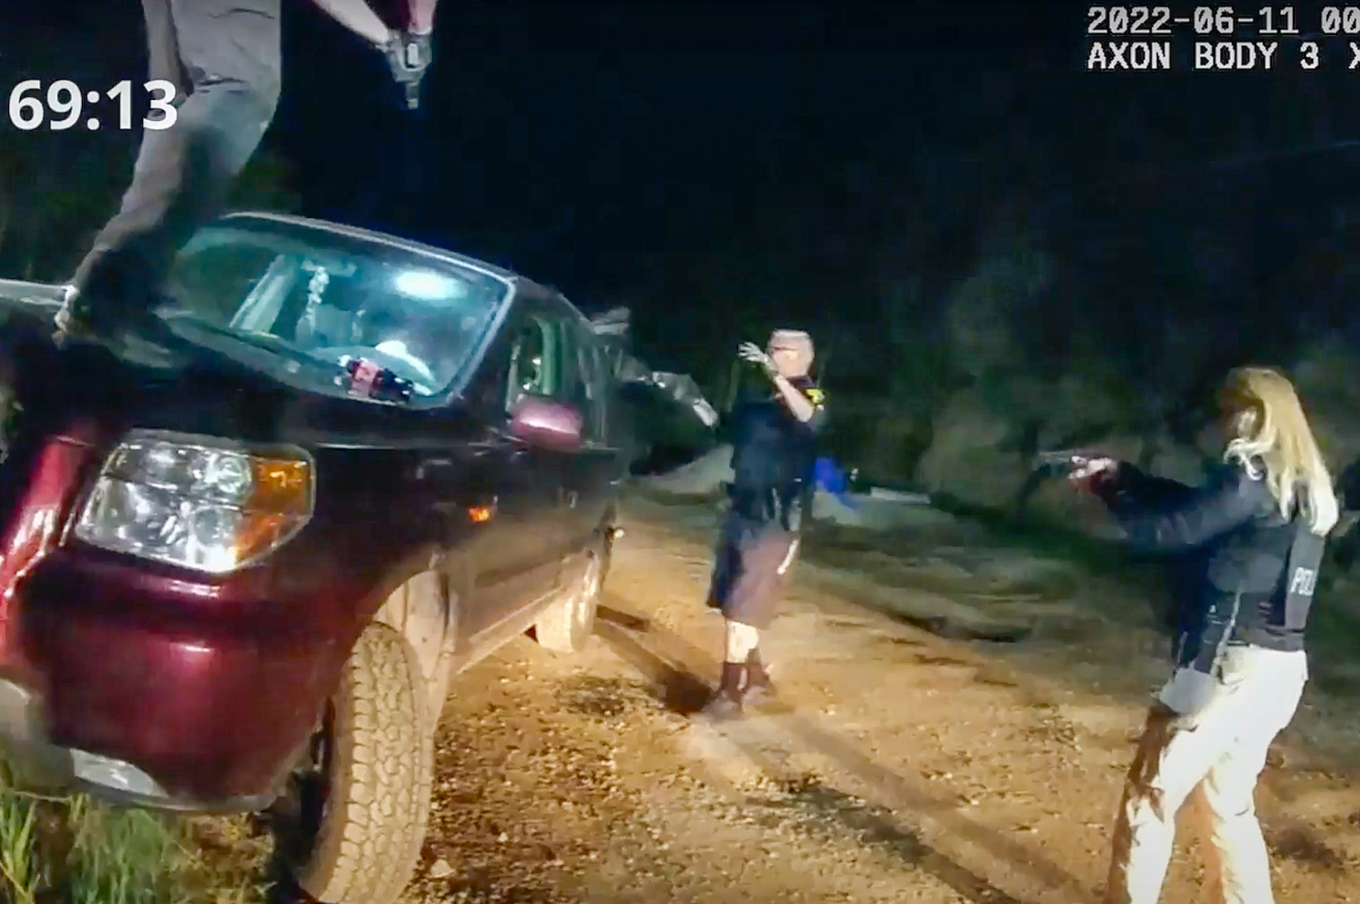 Body camera footage worn by Colorado officers show law enforcement’s interaction with Christian Glass, 22, during which his family believes he was suffering a mental health episode